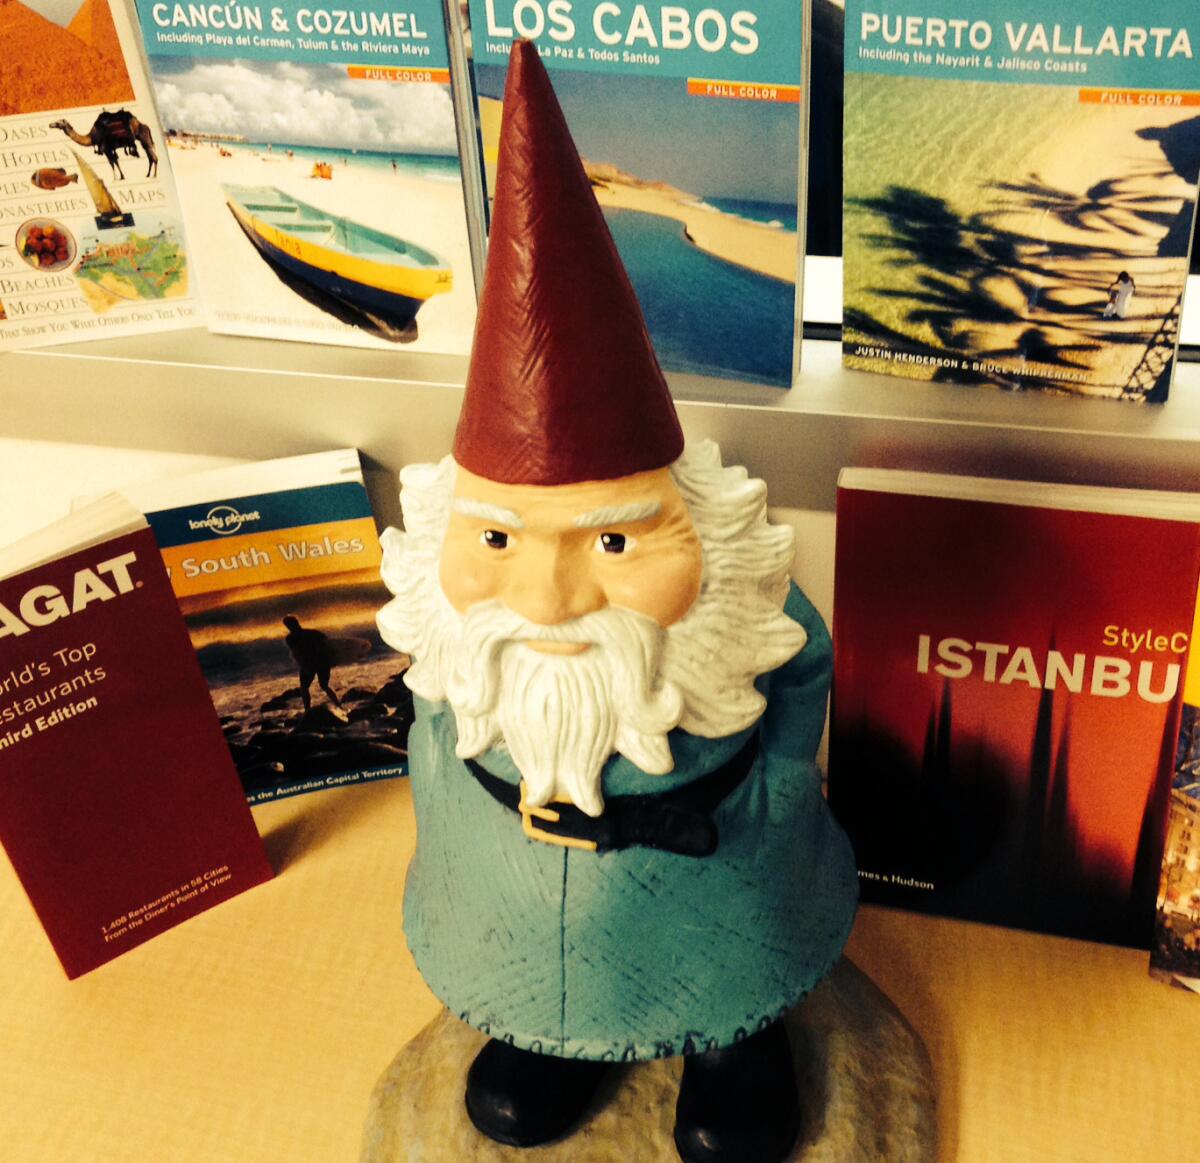 The Travelocity Gnome is closely identified with the online travel agency's brand.